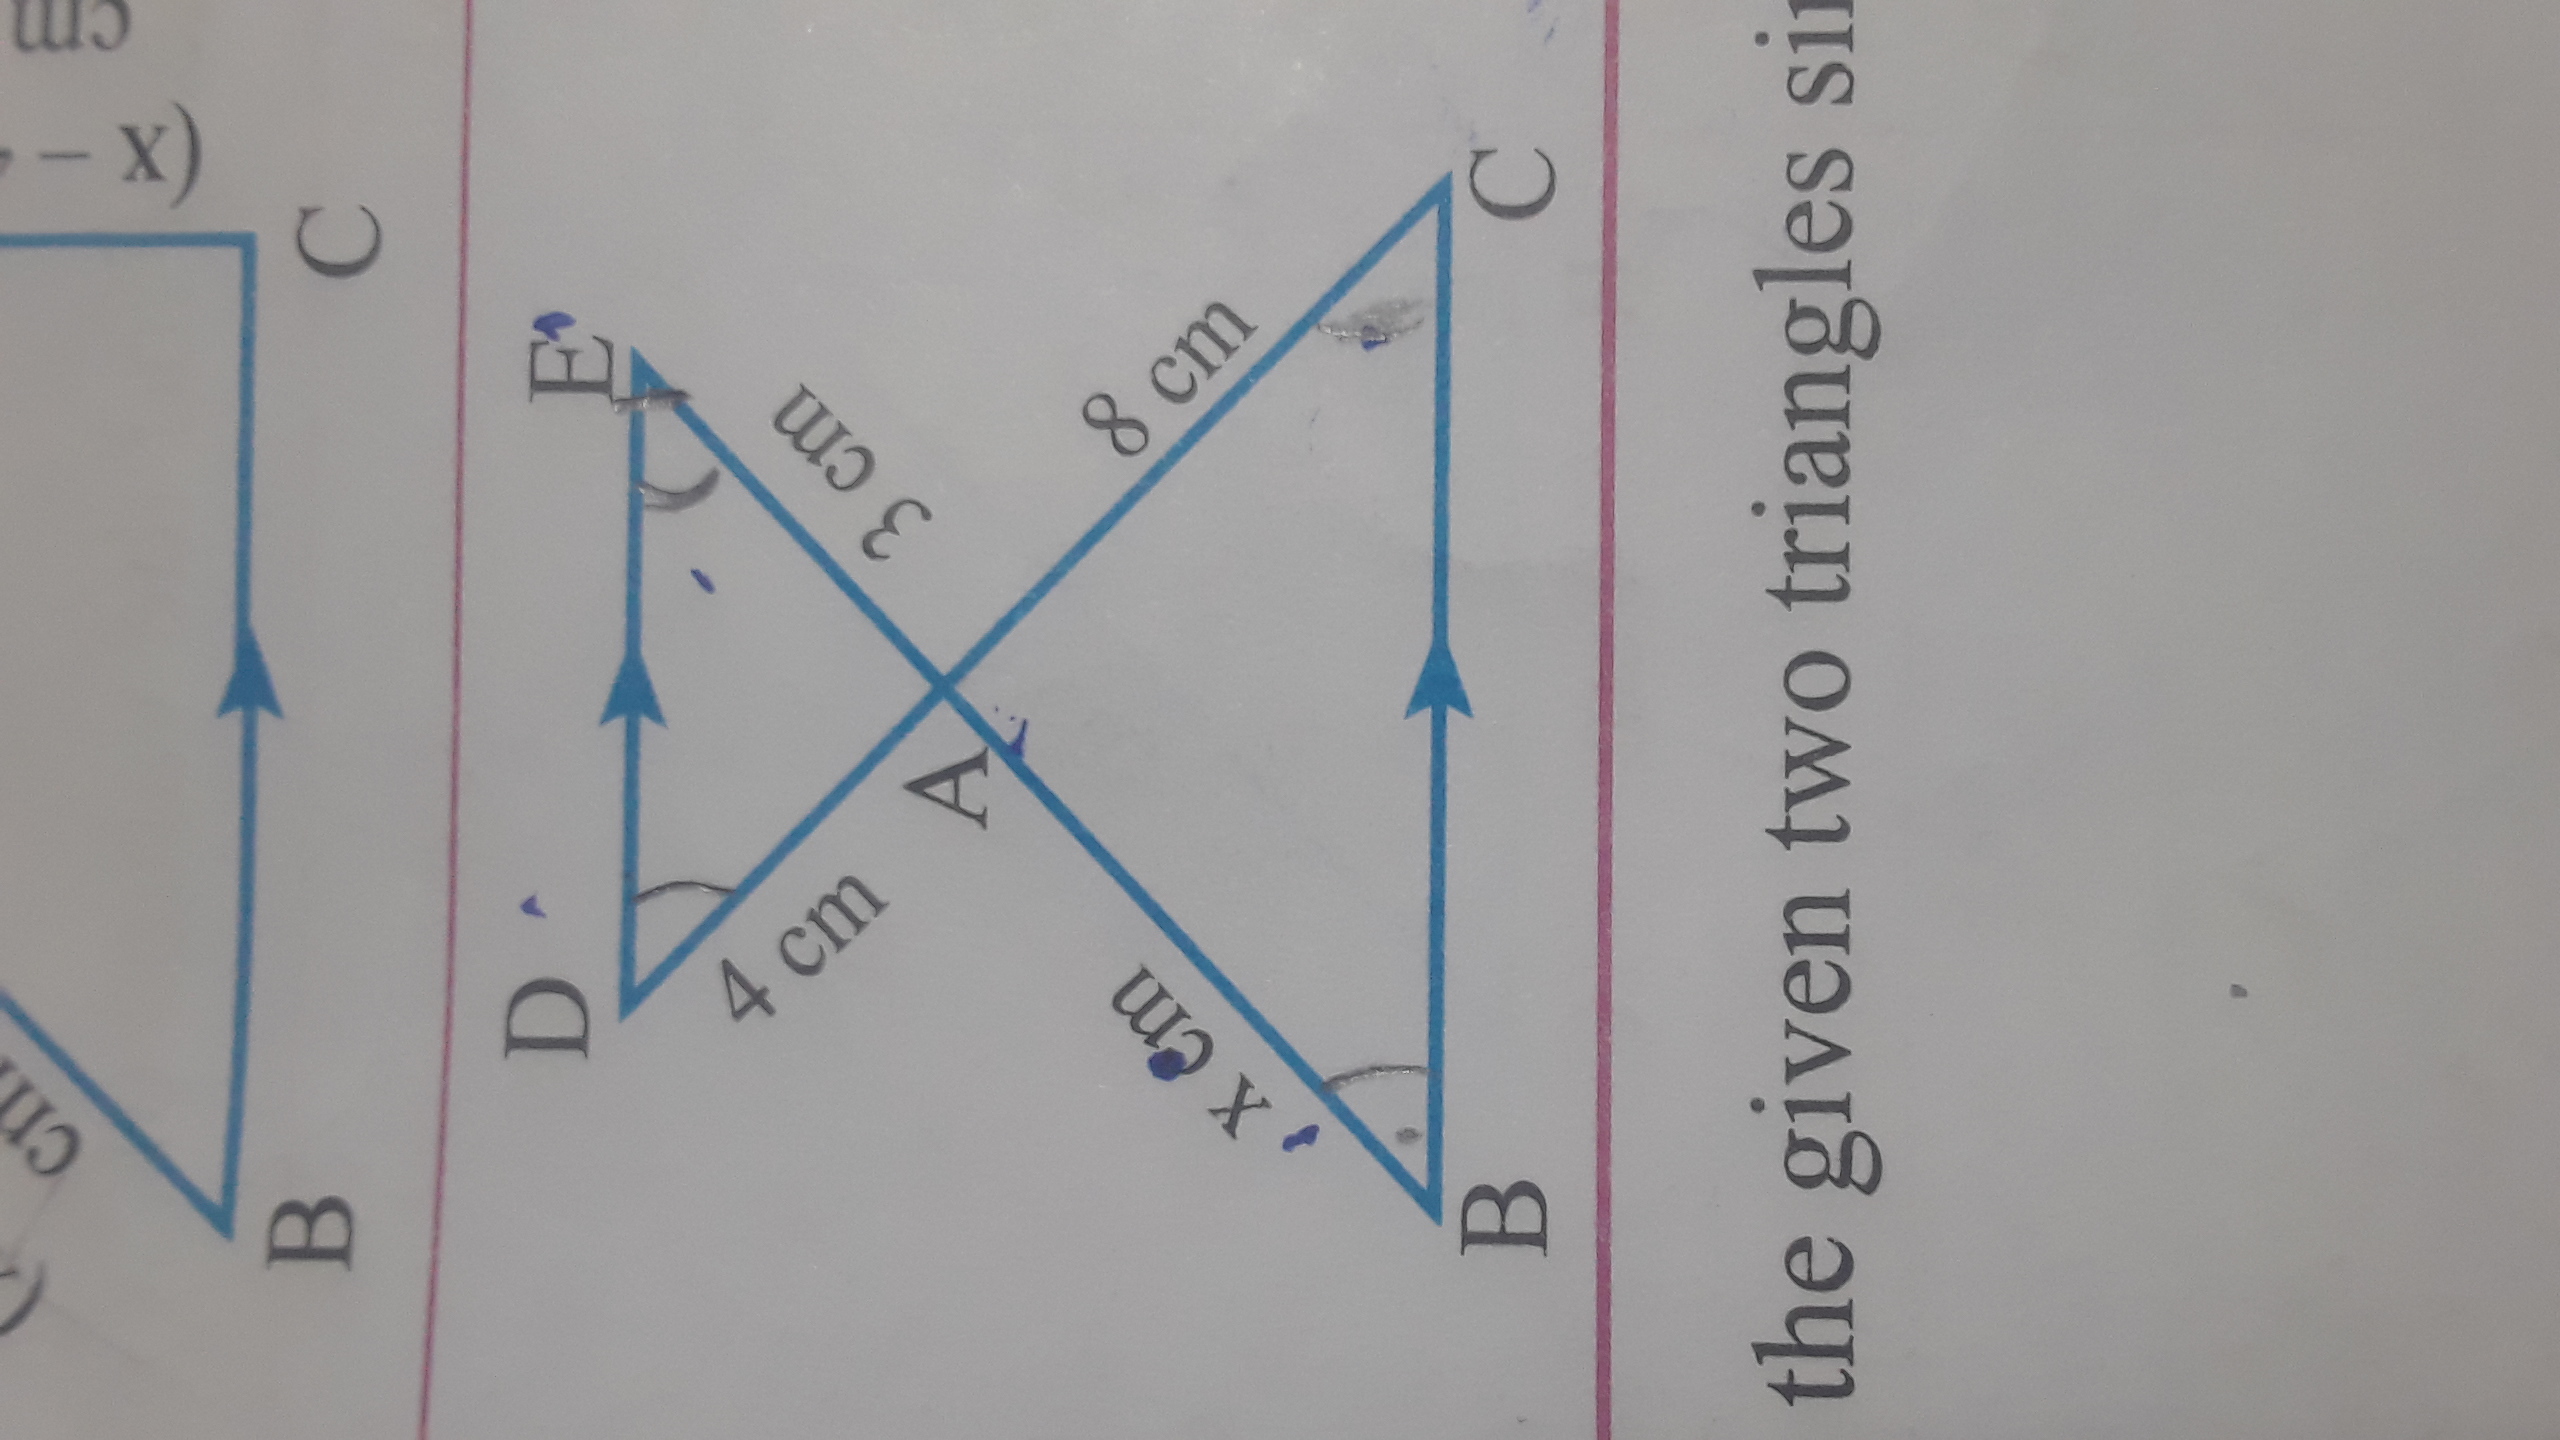 B
C
the given two triangles s
